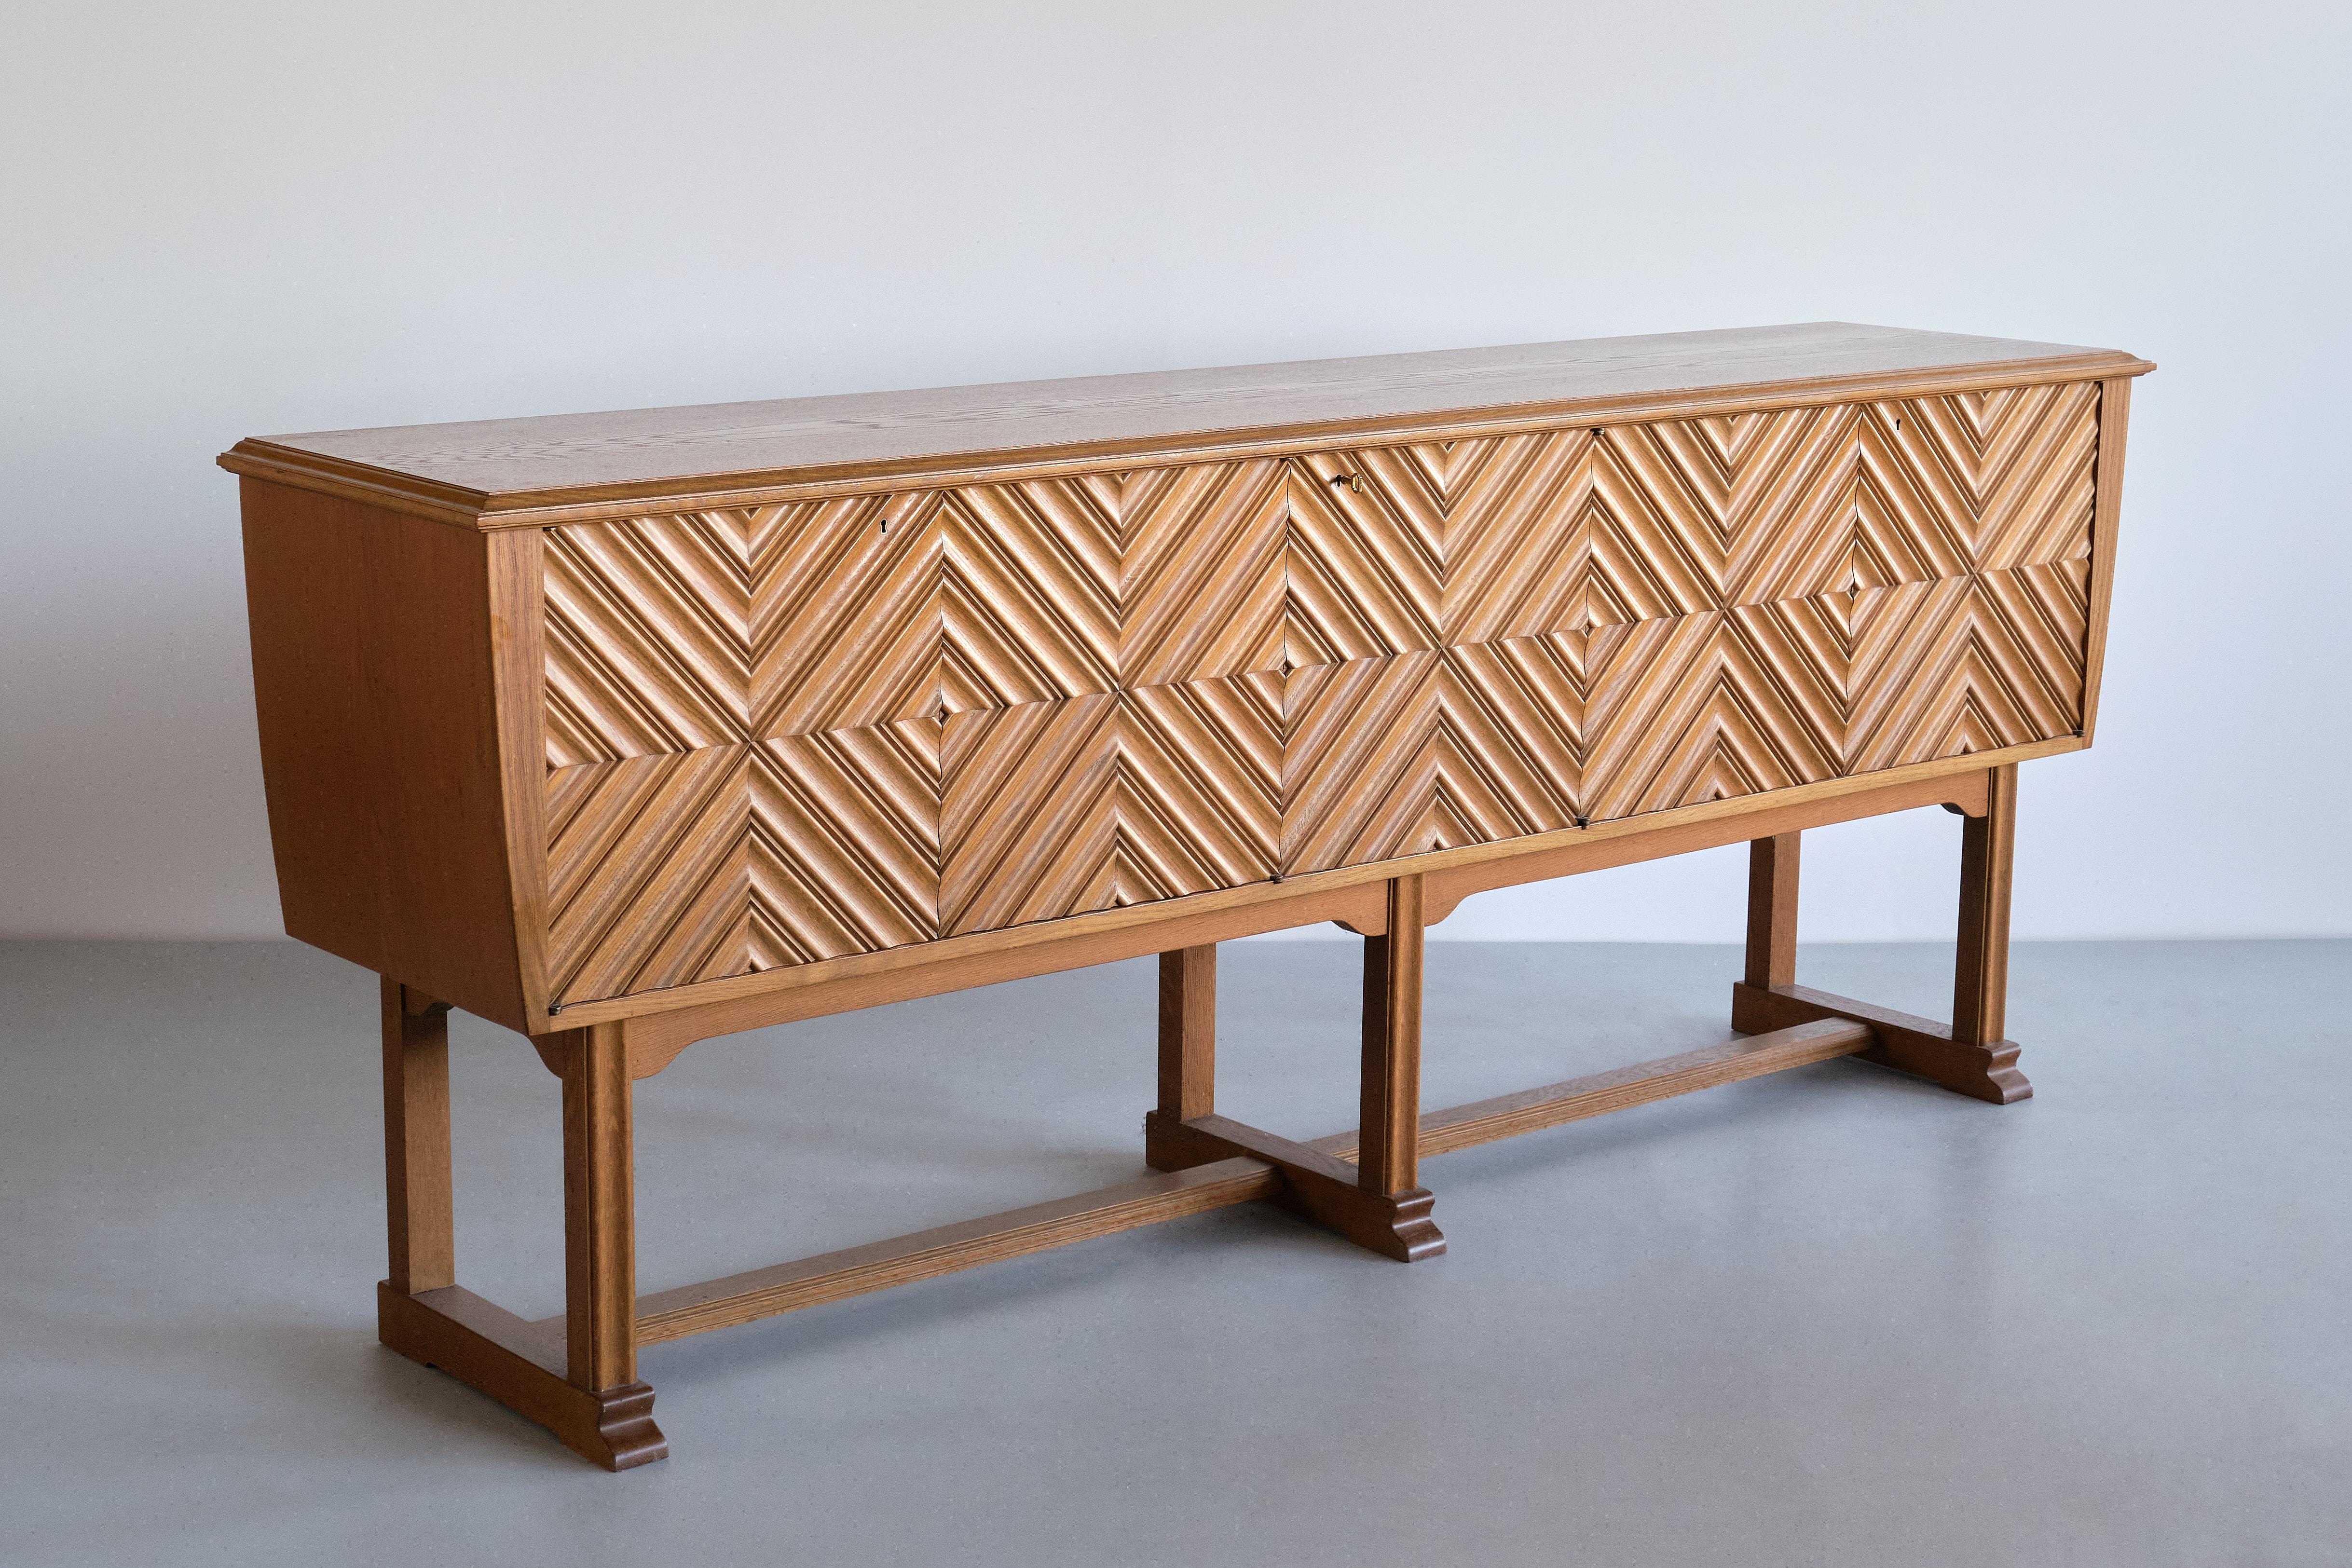 Exceptional Ludvig Sturm Solid Oak Sideboard, Inrednings-Kompaniet Malmö, 1948 In Good Condition For Sale In The Hague, NL